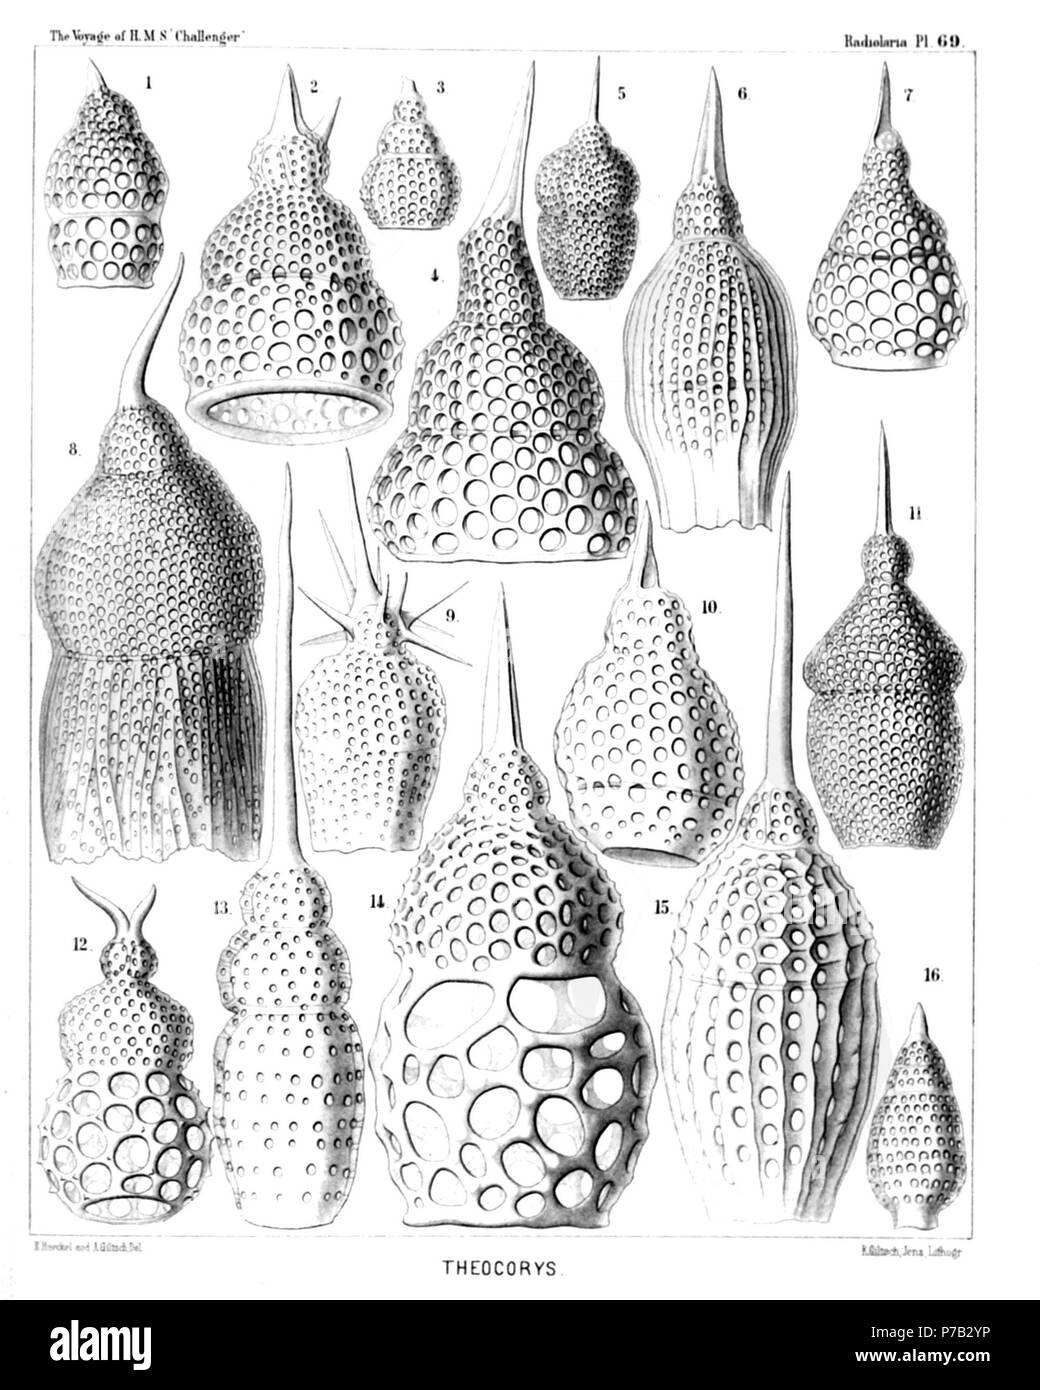 English: Illustration from Report on the Radiolaria collected by H.M.S. Challenger during the years 1873-1876. Part III. Original description follows:  Plate 69. Phormocyrtida et Theocyrtida.  Diam.  Fig. 1. Theocorys plutonis, n. sp., × 400  Fig. 2. Lophoconus rhinoceros, n. sp., × 400  Fig. 3. Theocorys apollinis, n. sp., × 300  Fig. 4. Theoconus jovis, n. sp., × 400  Fig. 5. Theocorys veneris, n. sp., × 300  Fig. 6. Phormocyrtis costata, n. sp., × 300  Fig. 7. Theoconus junonis, n. sp., × 300  Fig. 8. Theocyrtis ptychodes, n. sp., × 400  Fig. 9. Lophocorys astrocephala, n. sp., × 300  Fig.  Stock Photo